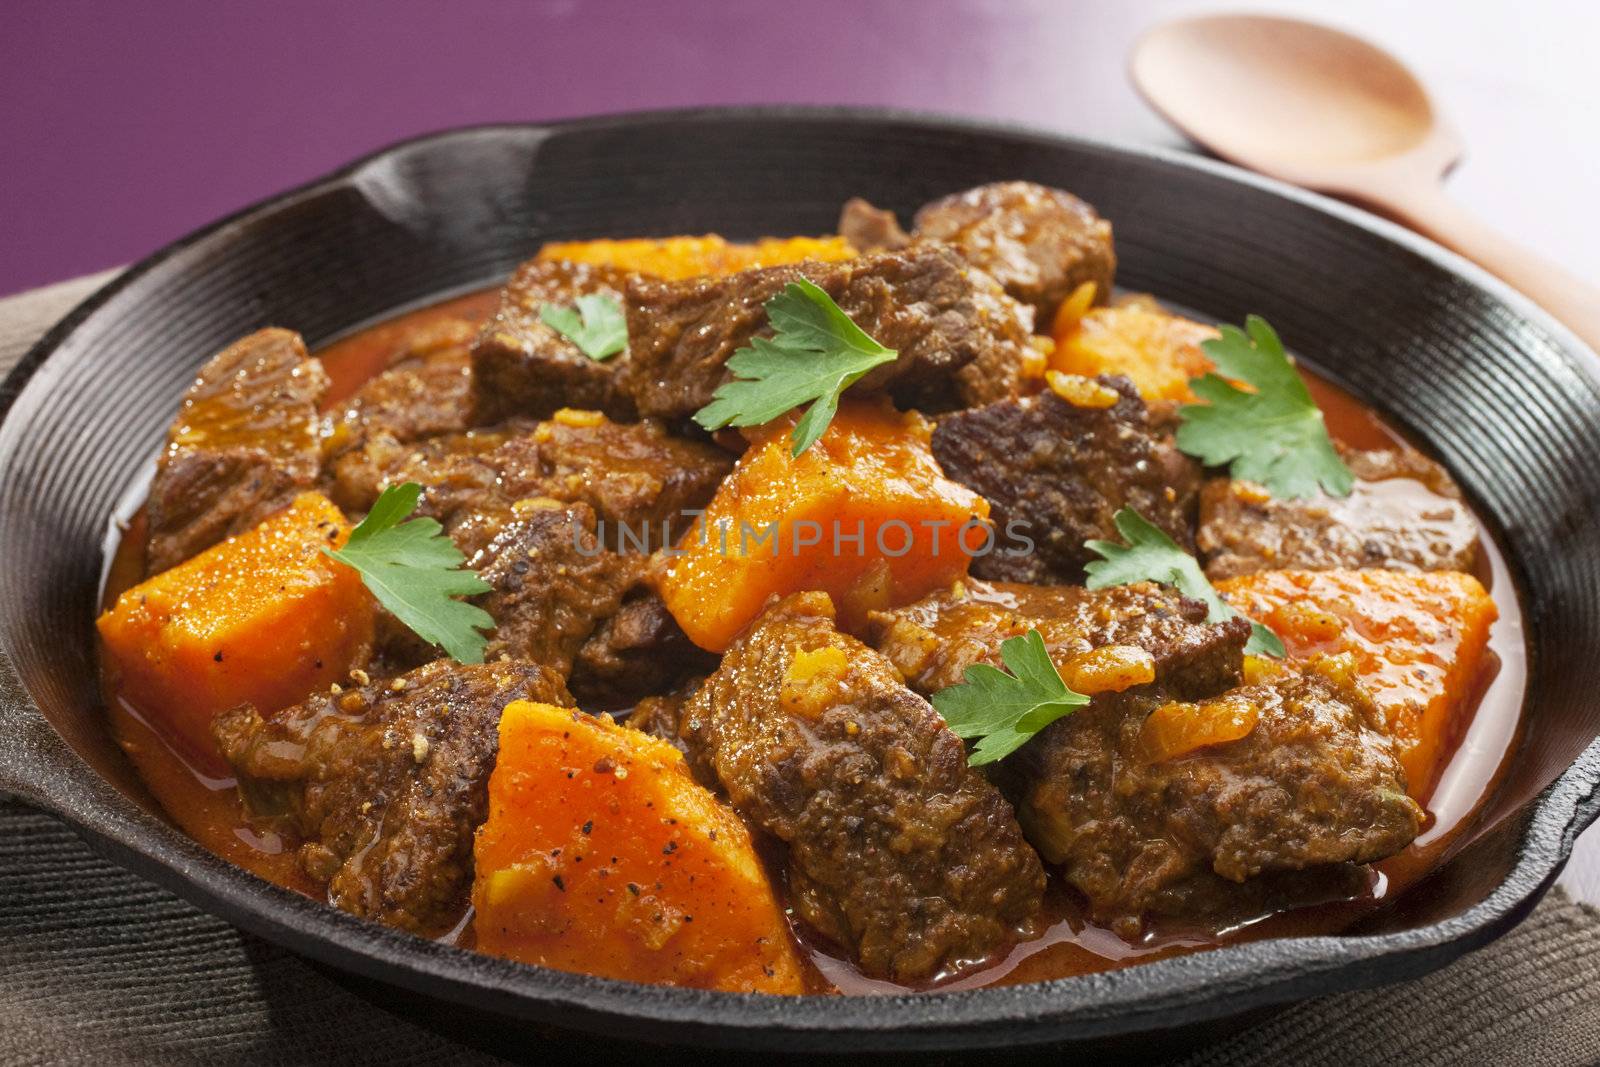 Moroccan tagine or stew of beef with sweet potato, in a cast iron pan.